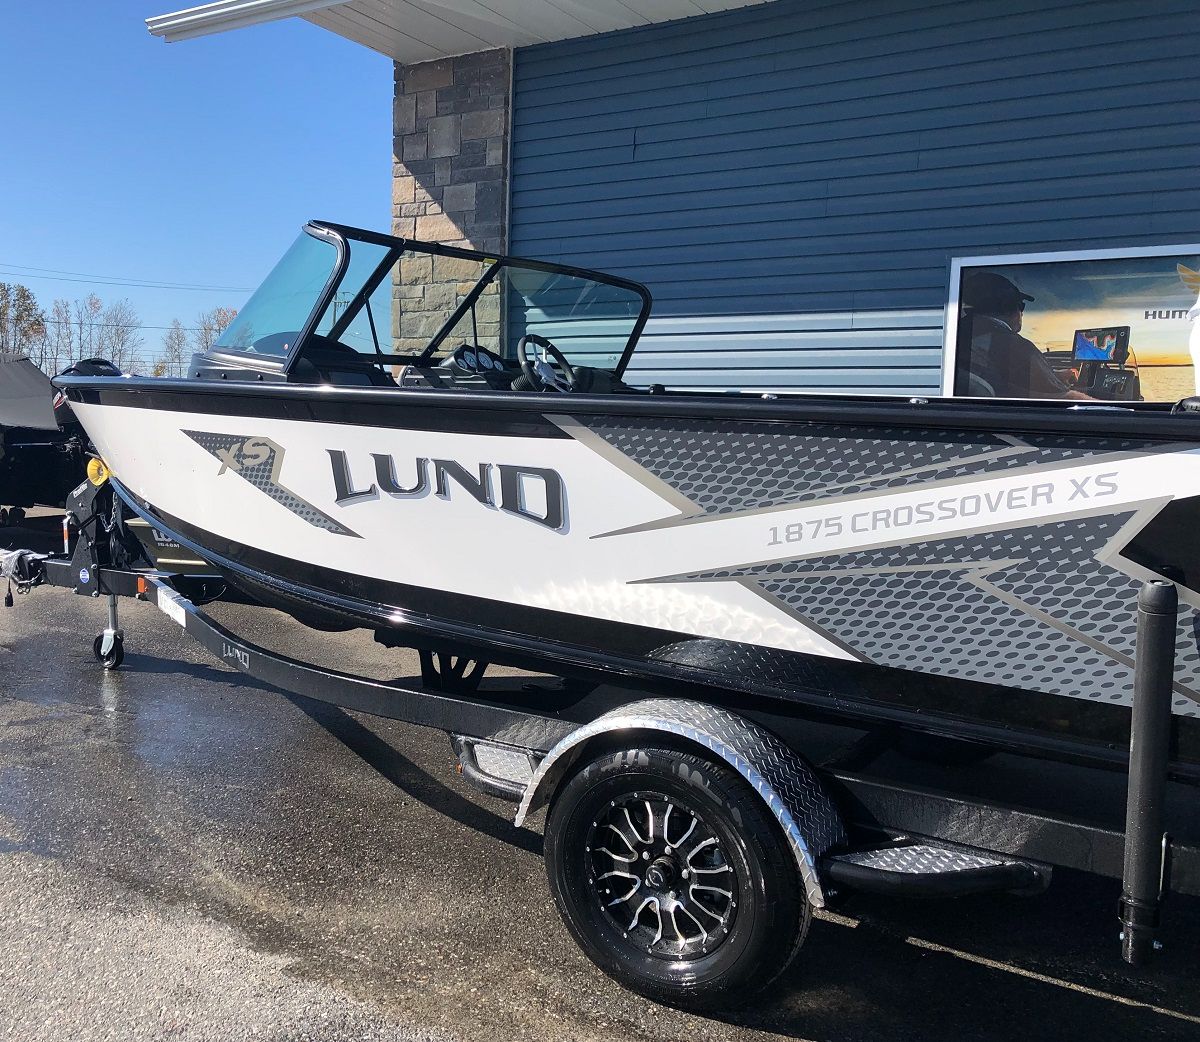 Lund® Crossover XS 1875 - Aluminum Family Fish and Ski Boats